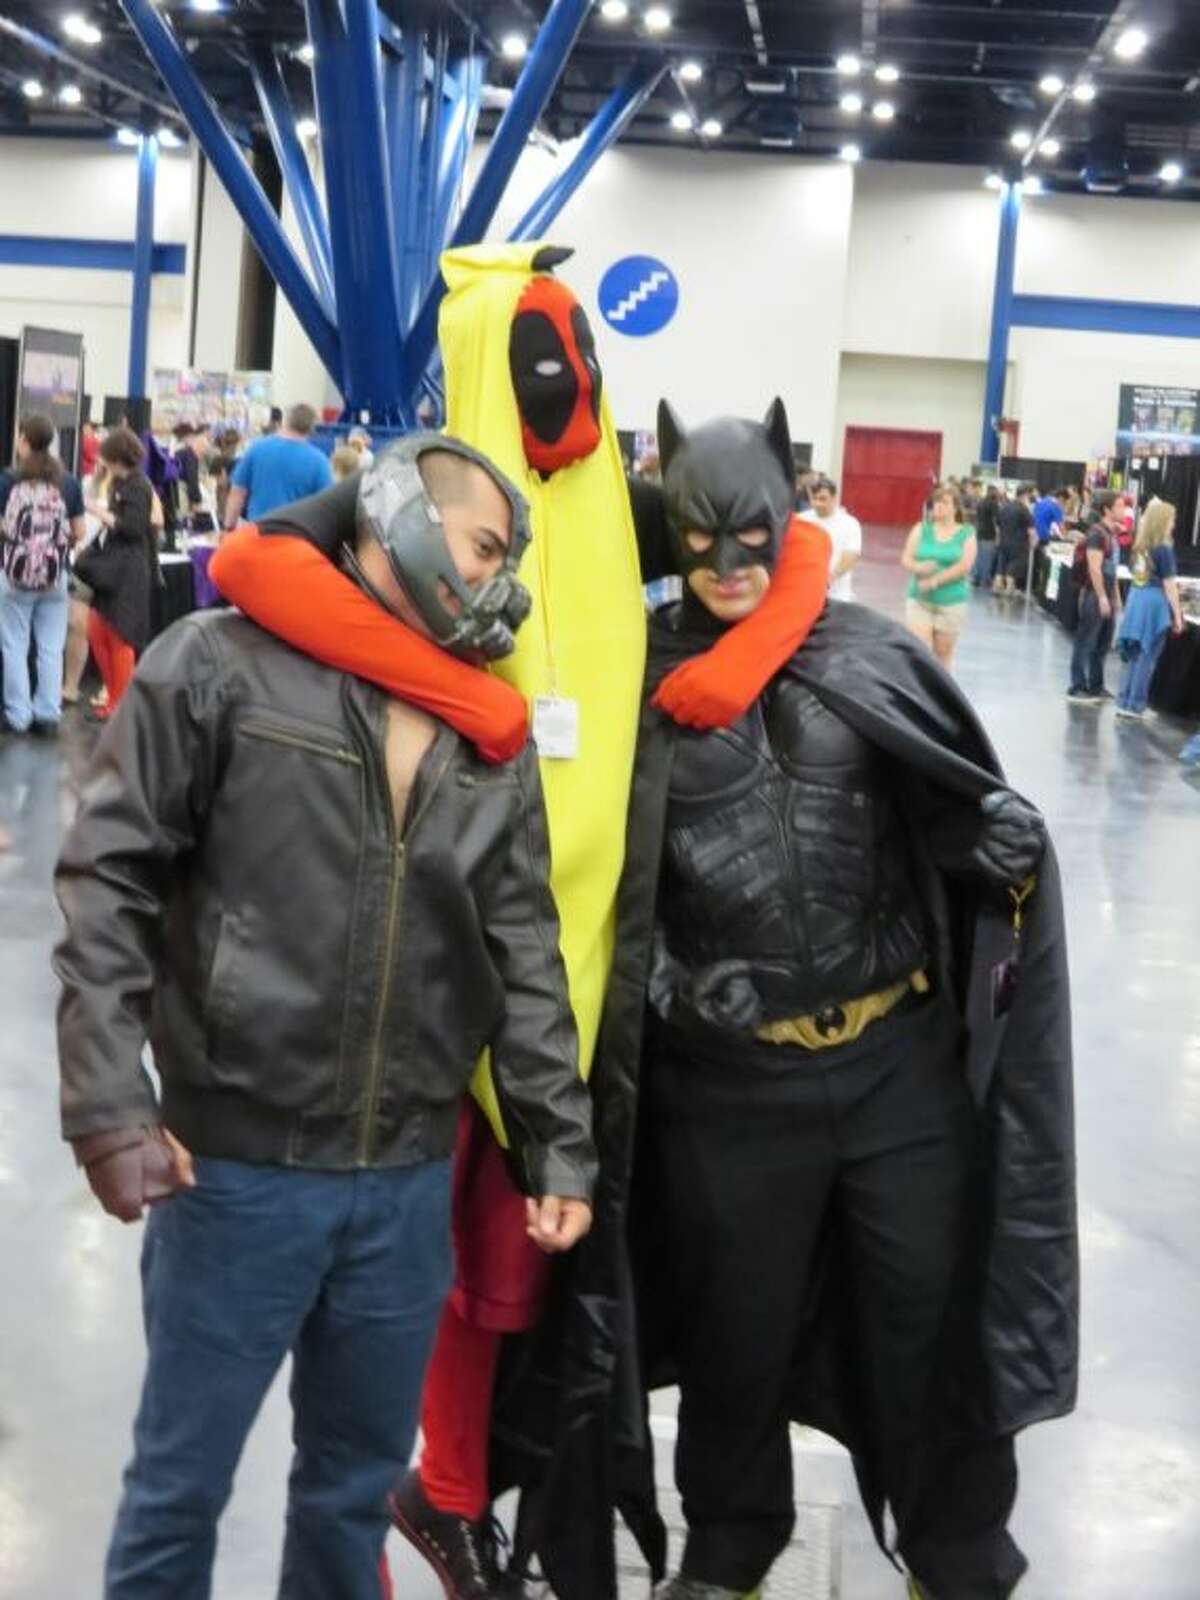 Cosplayers dressed as “Bananapool,” Bane and Batman pose for pictures at Comicpalooza 2014 at the George R Brown Convention Center Memorial Day weekend.